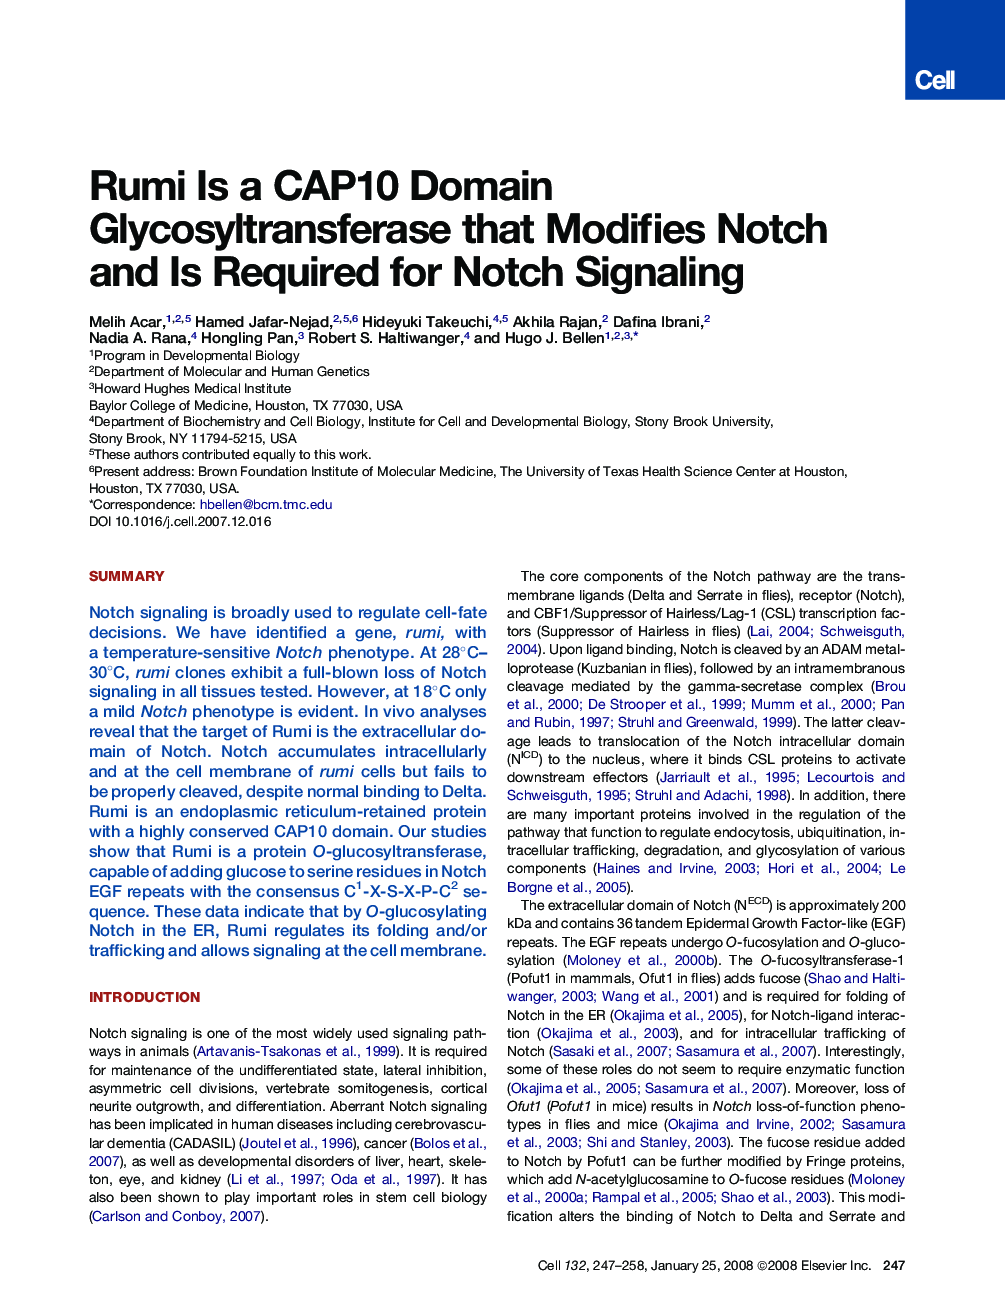 Rumi Is a CAP10 Domain Glycosyltransferase that Modifies Notch and Is Required for Notch Signaling